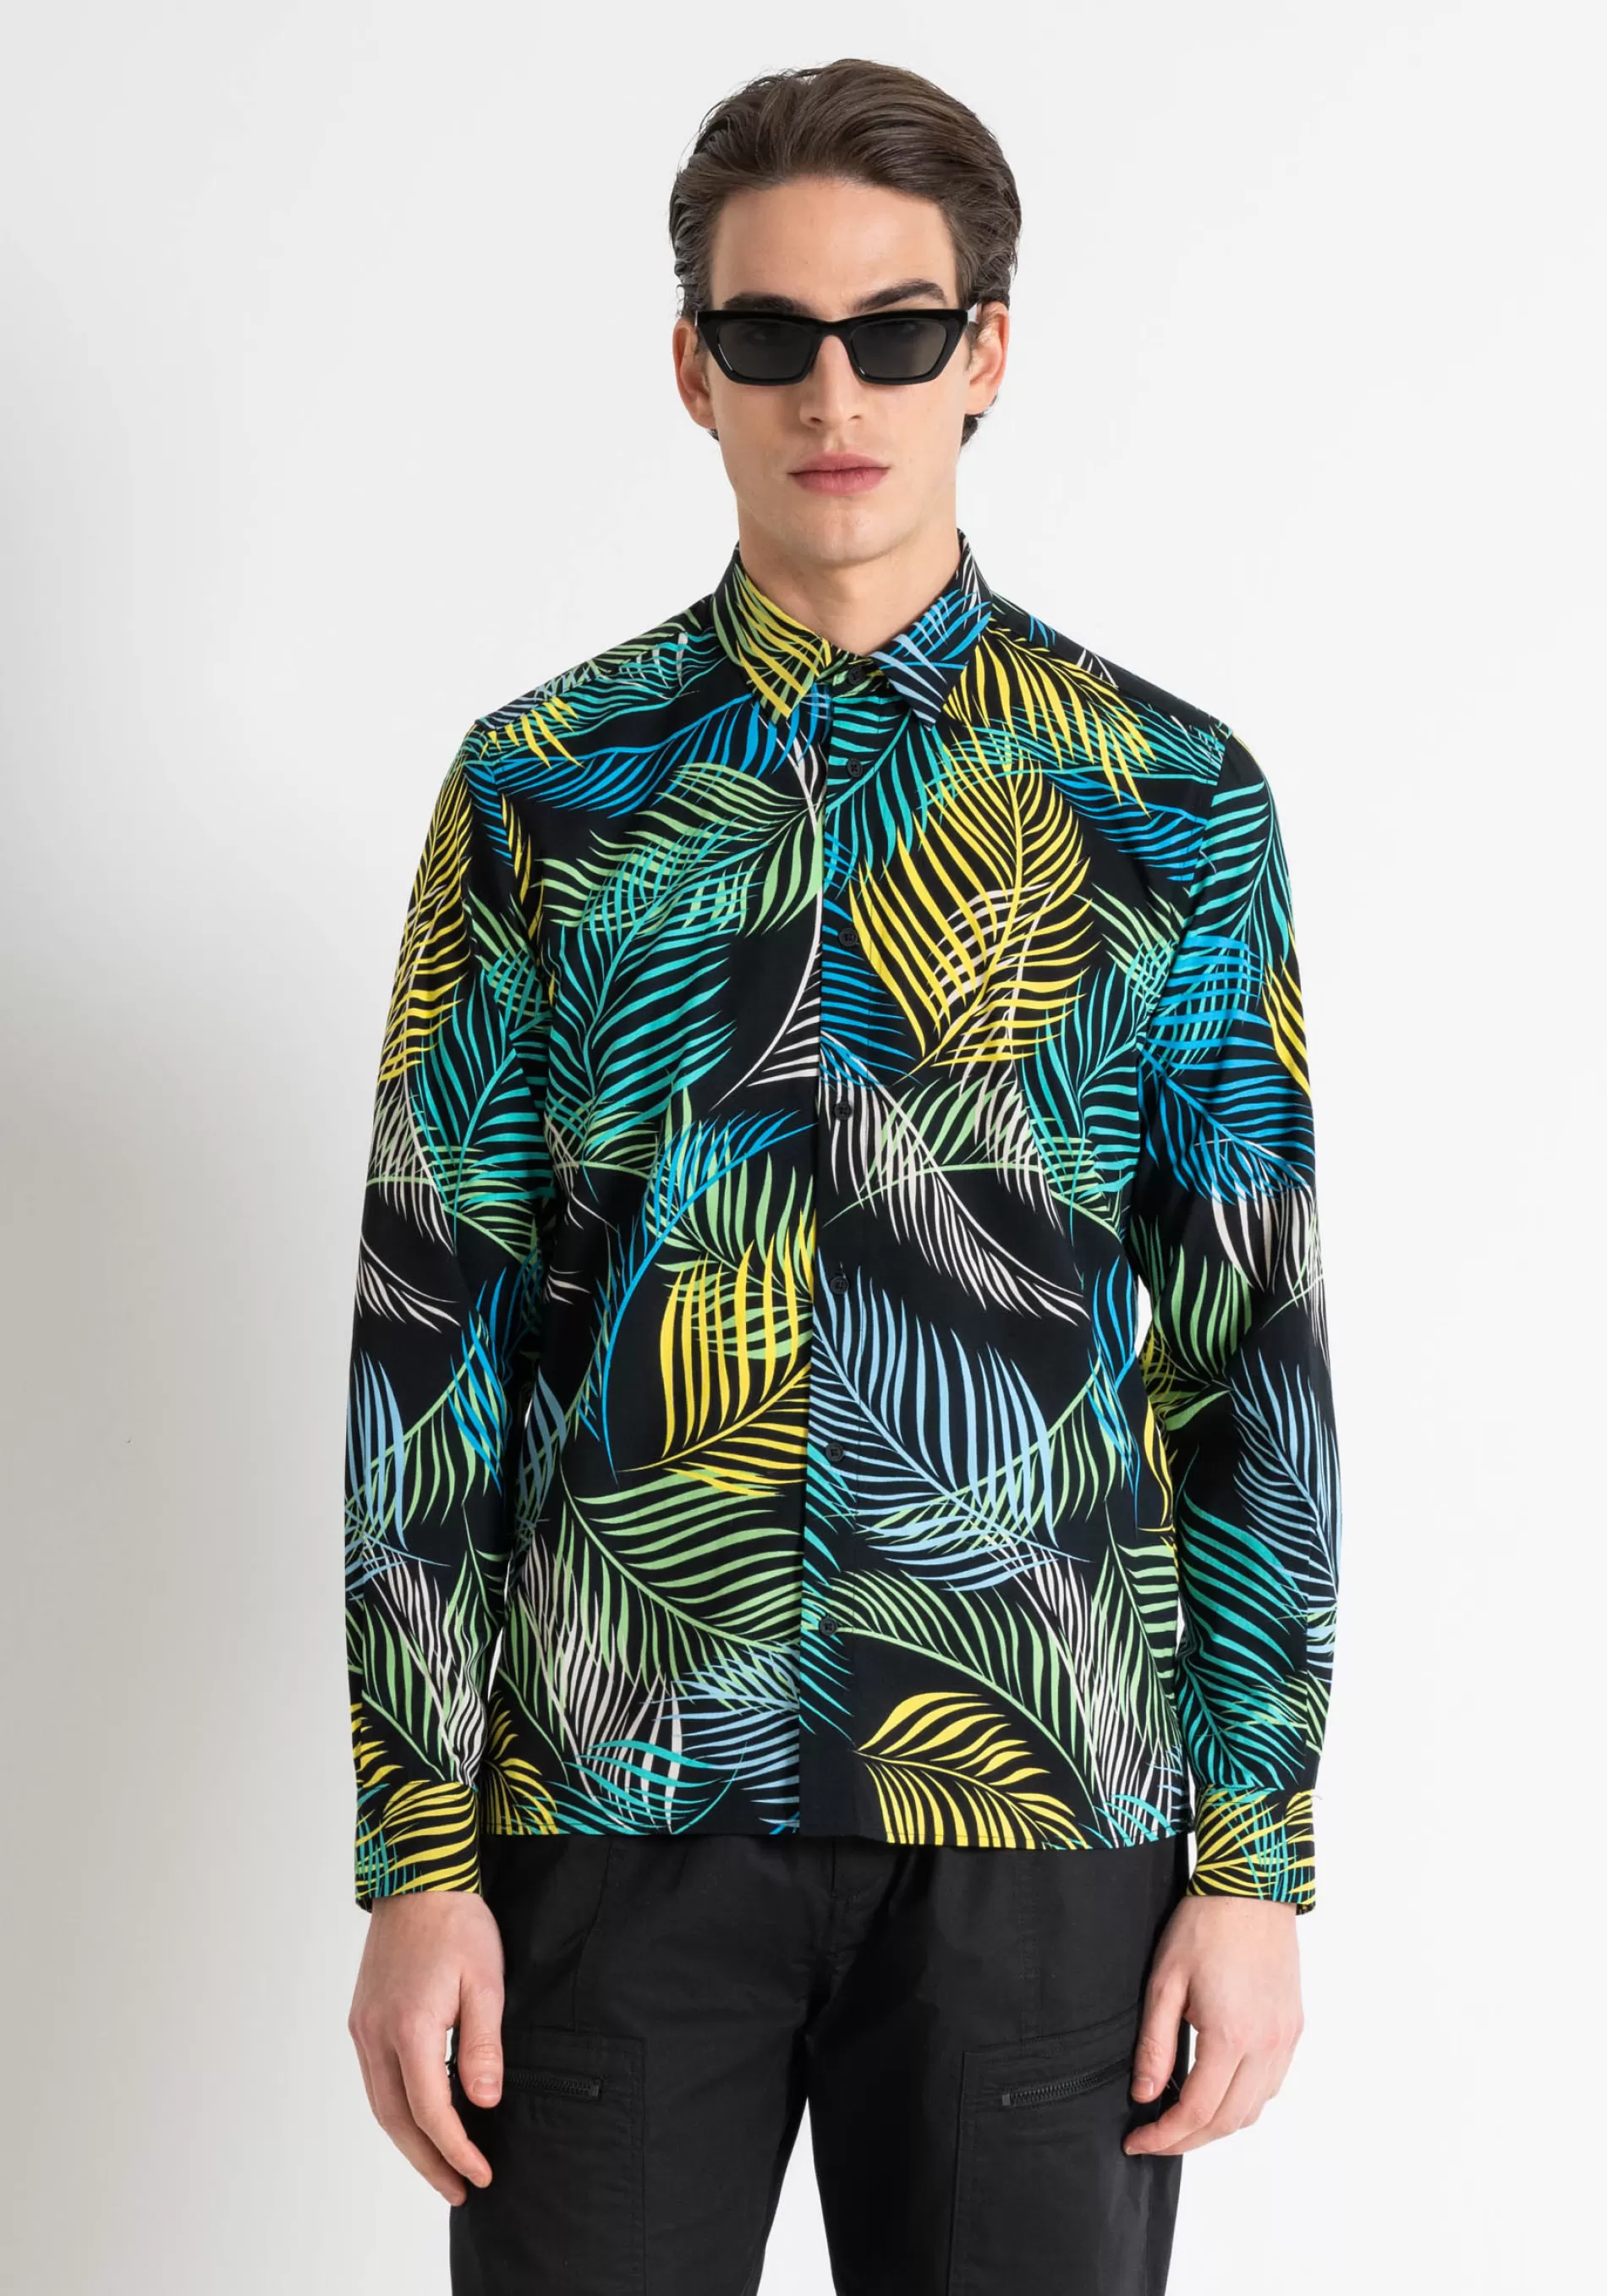 Sale "BARCELONA" REGULAR STRAIGHT FIT SHIRT IN PRINTED SOFT COTTON BLEND Shirts